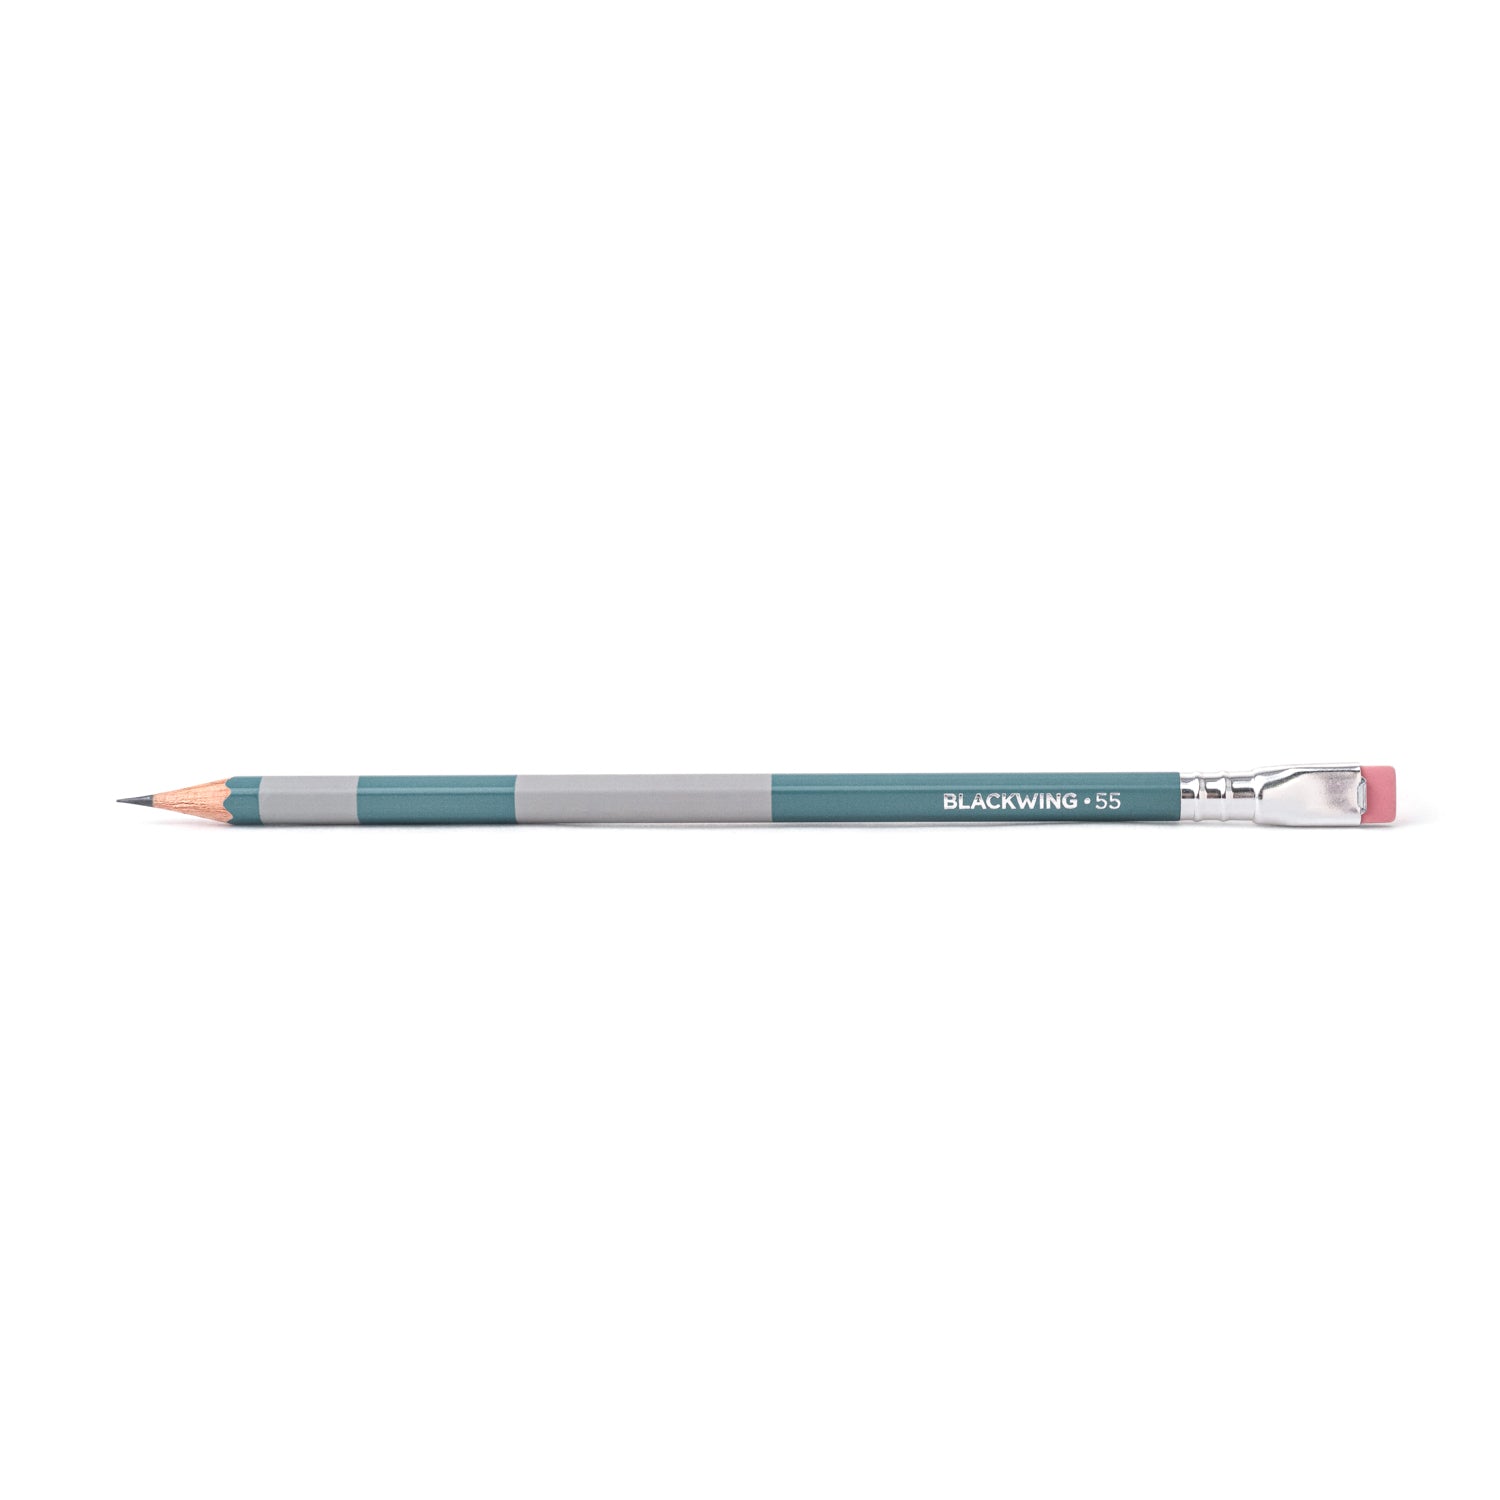 The Best Pencils for Writing (Grades K - 12)